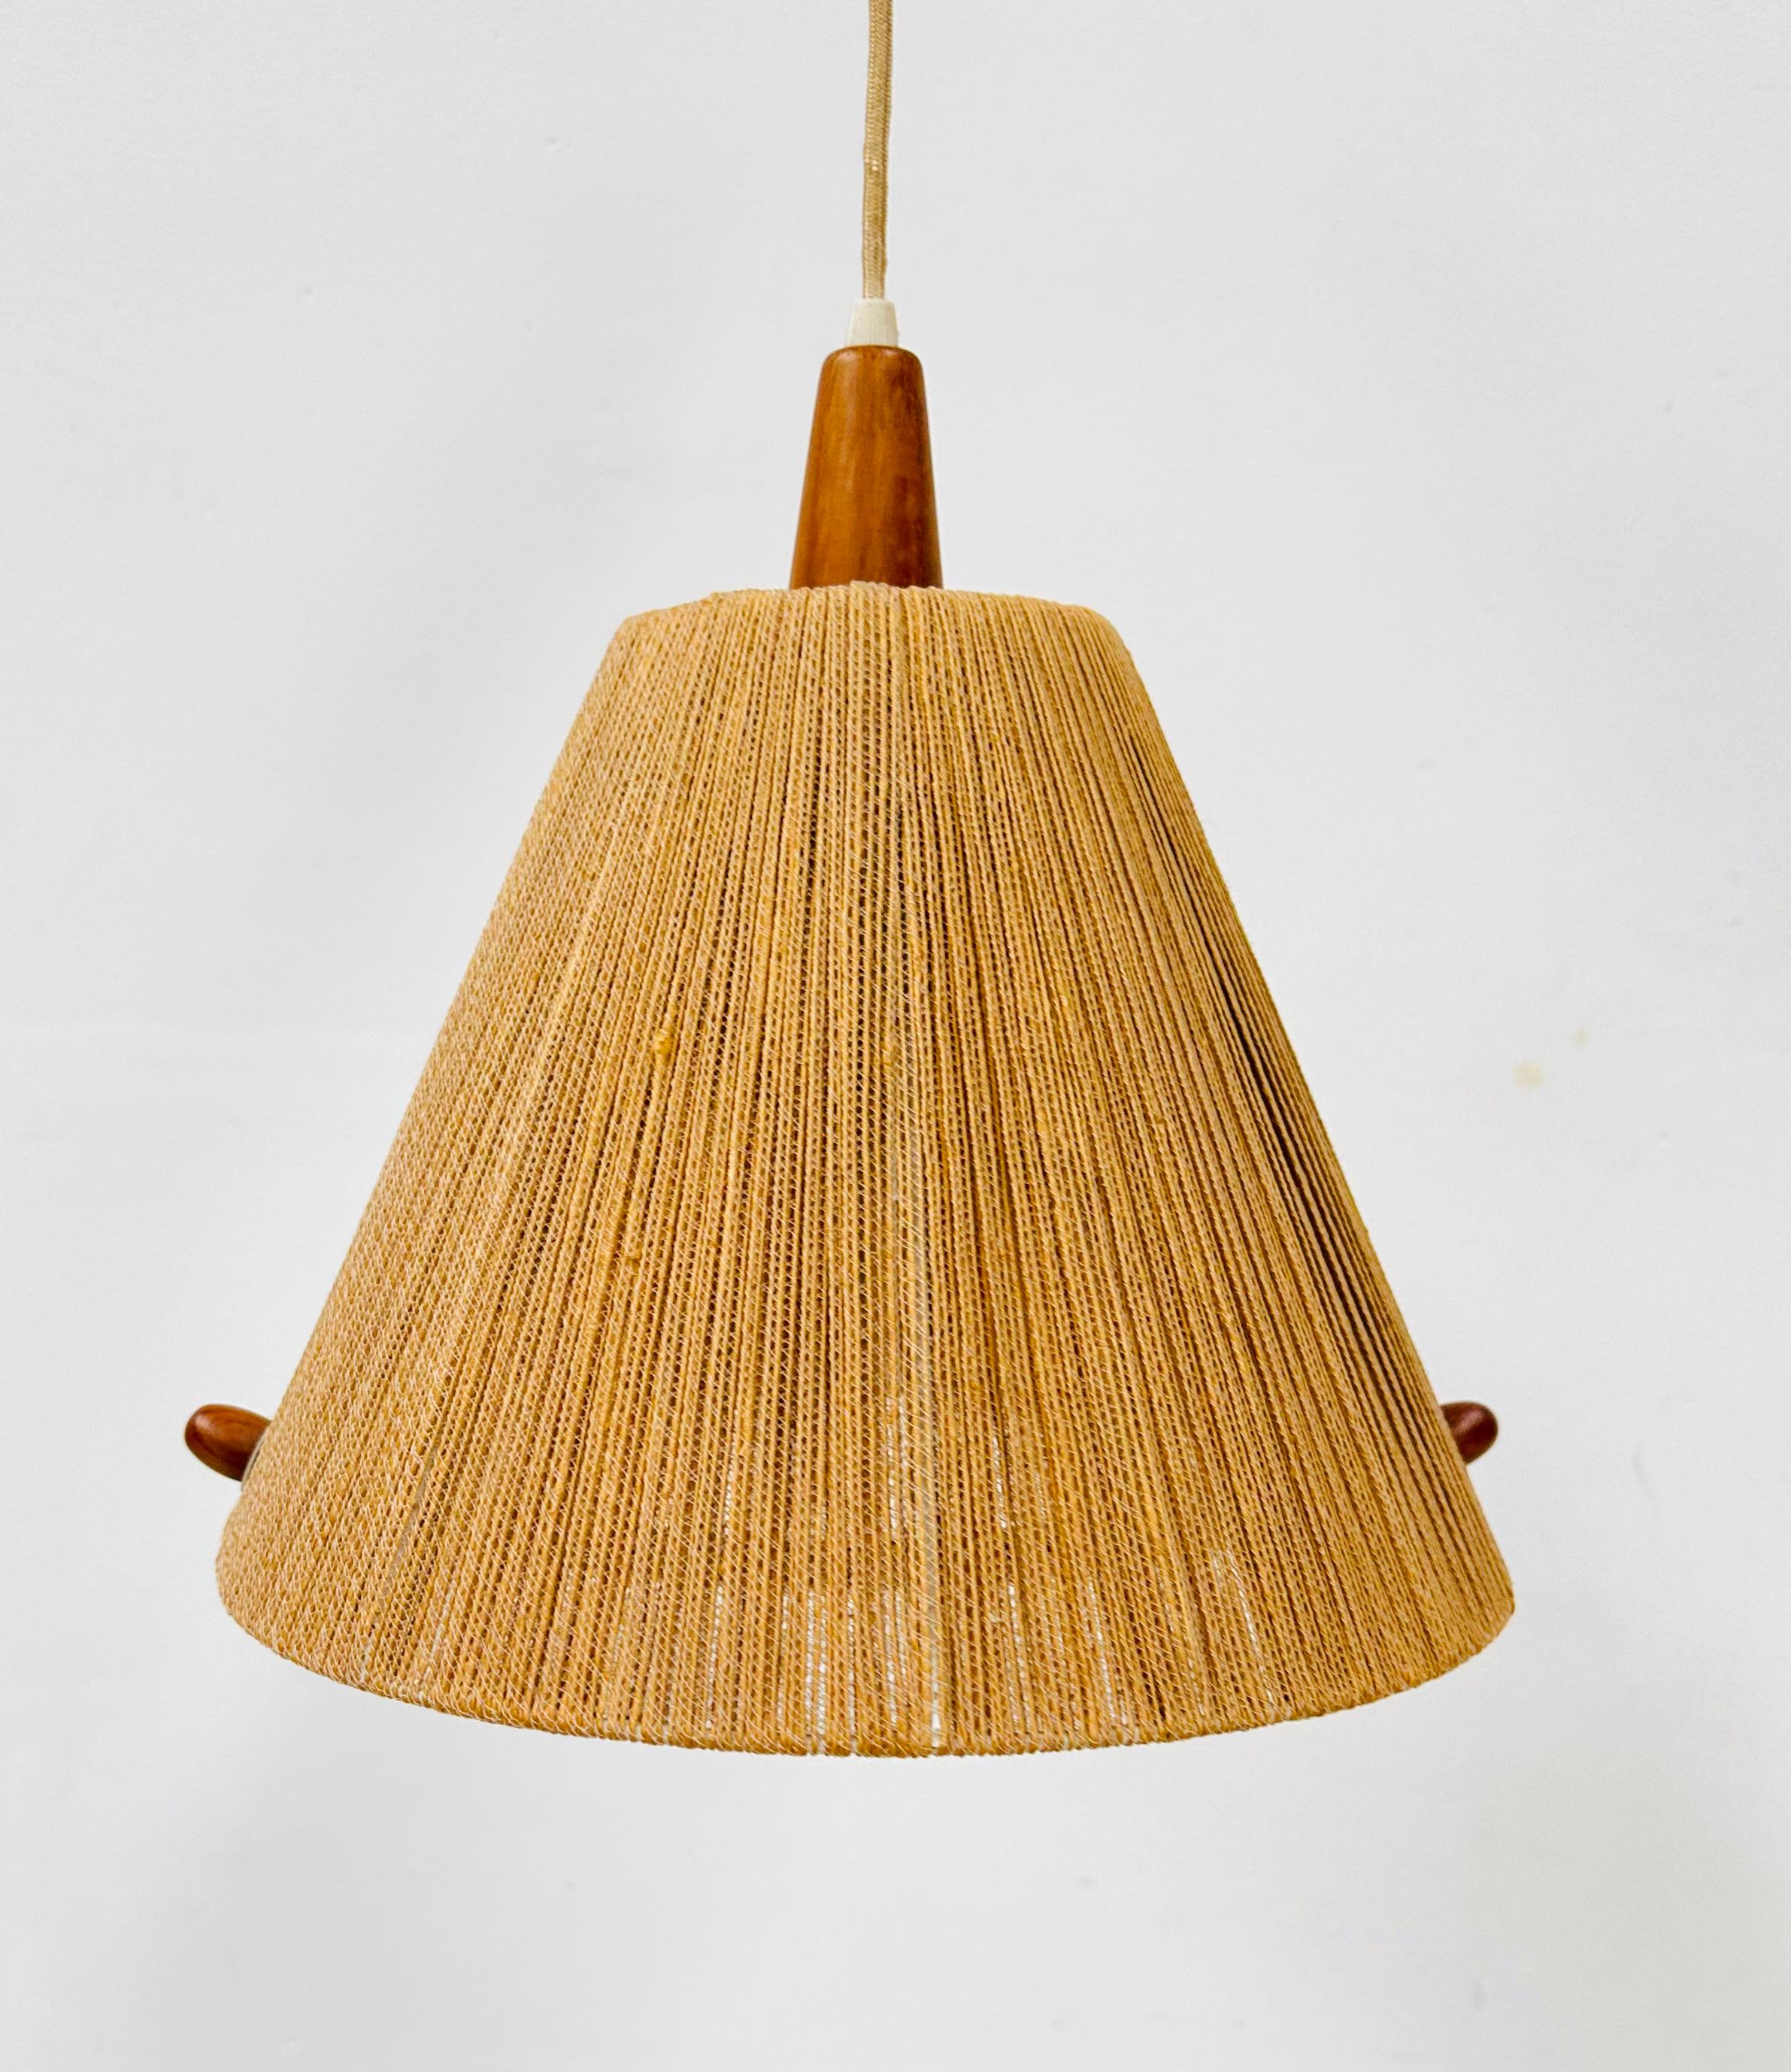 Late 20th Century Vintage Swiss Extensible Hanging Lamp by Temde Leuchten type 342, 1970s. For Sale